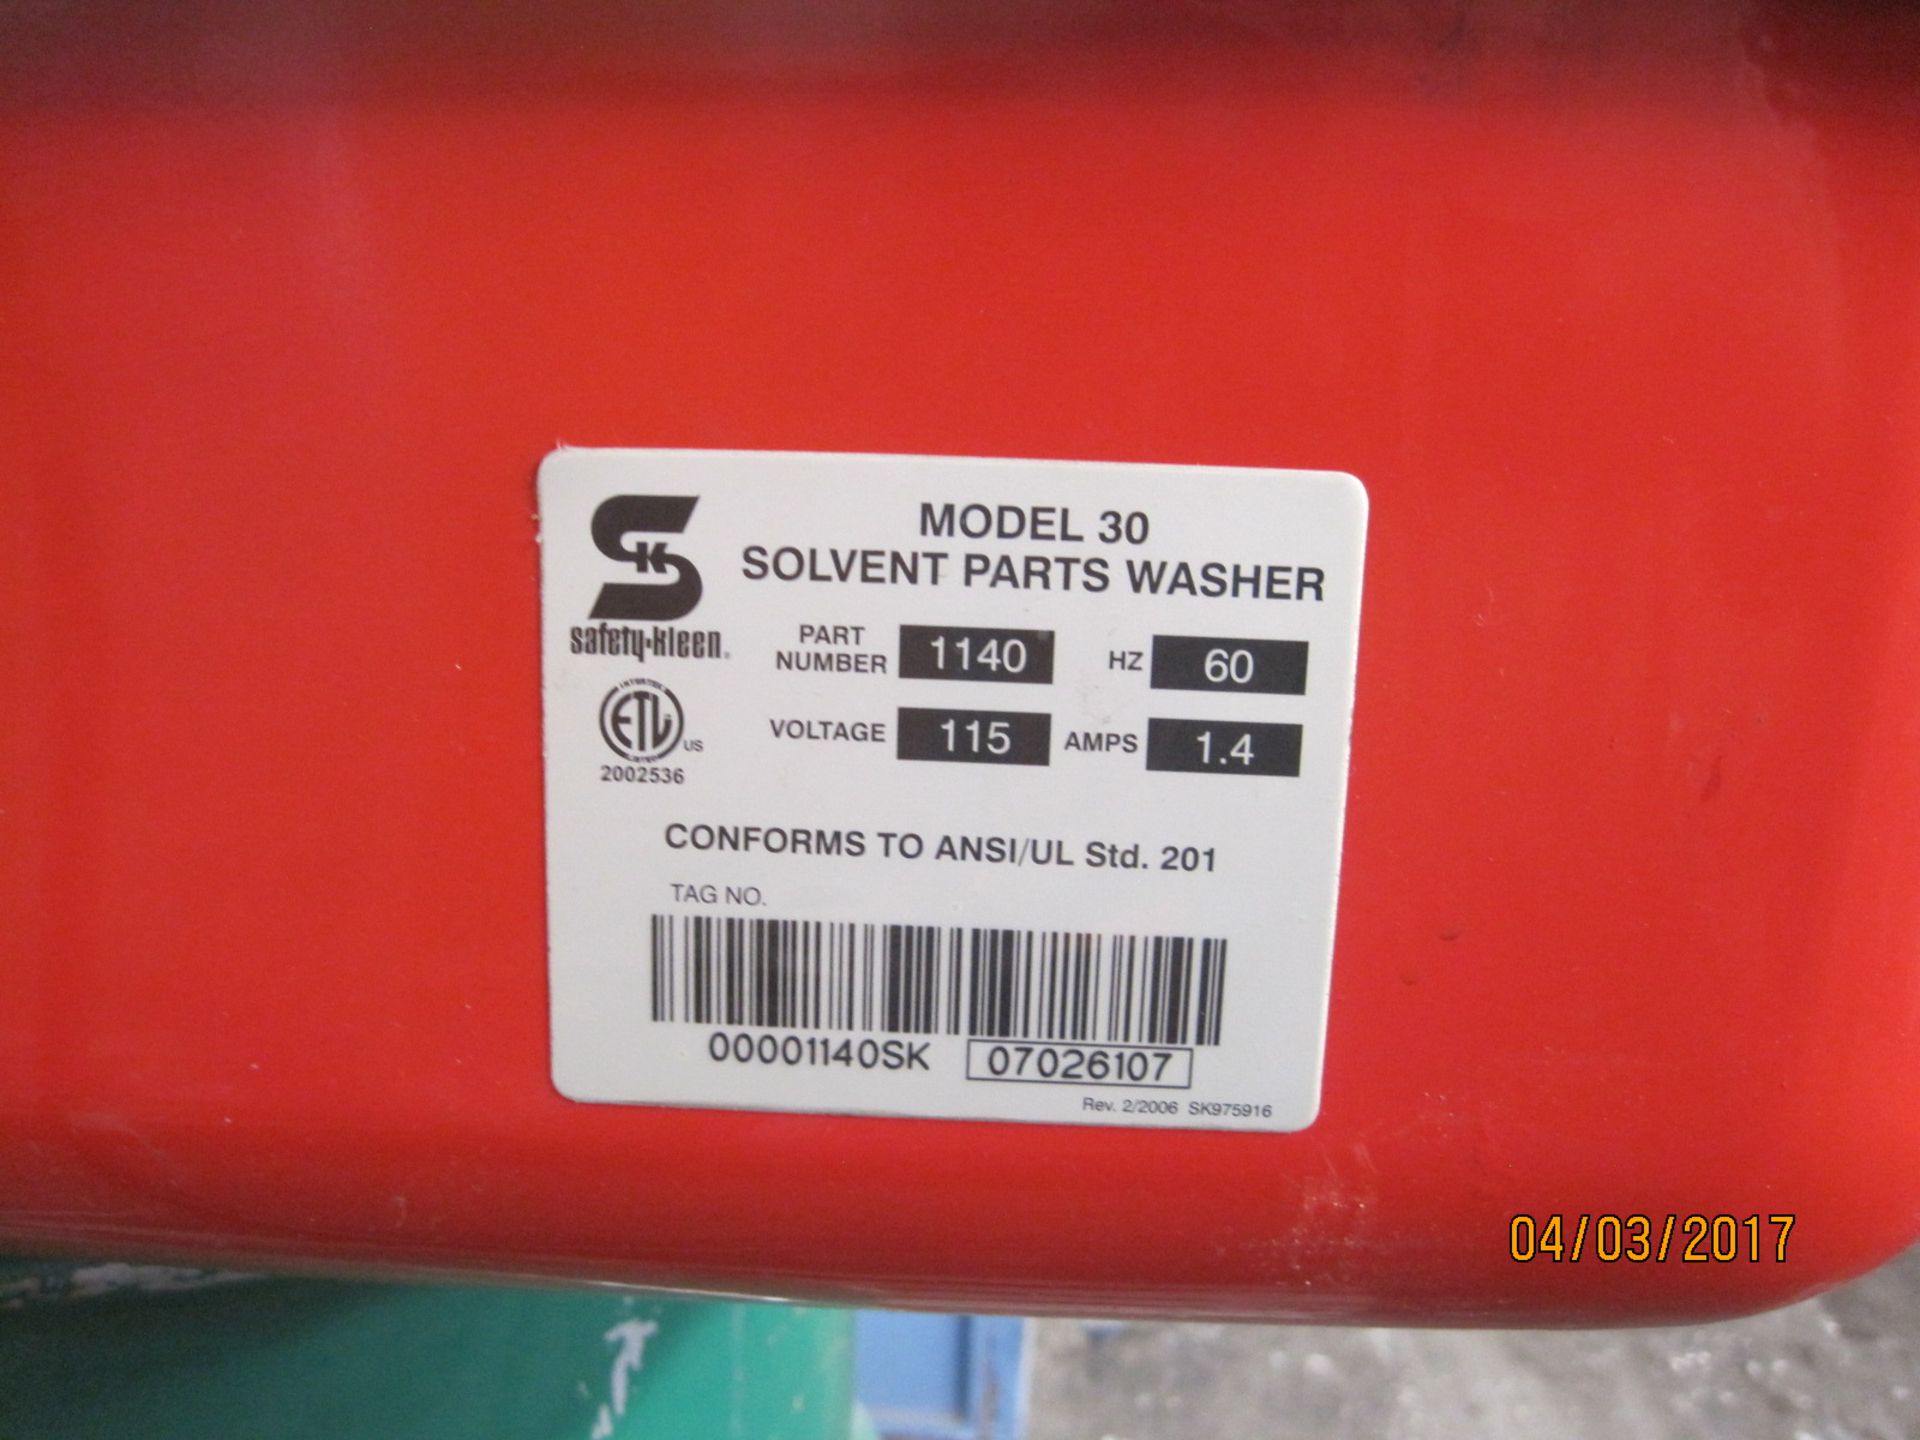 Satety-Kleen Model 30 Solvent Parts Washer - Image 2 of 2